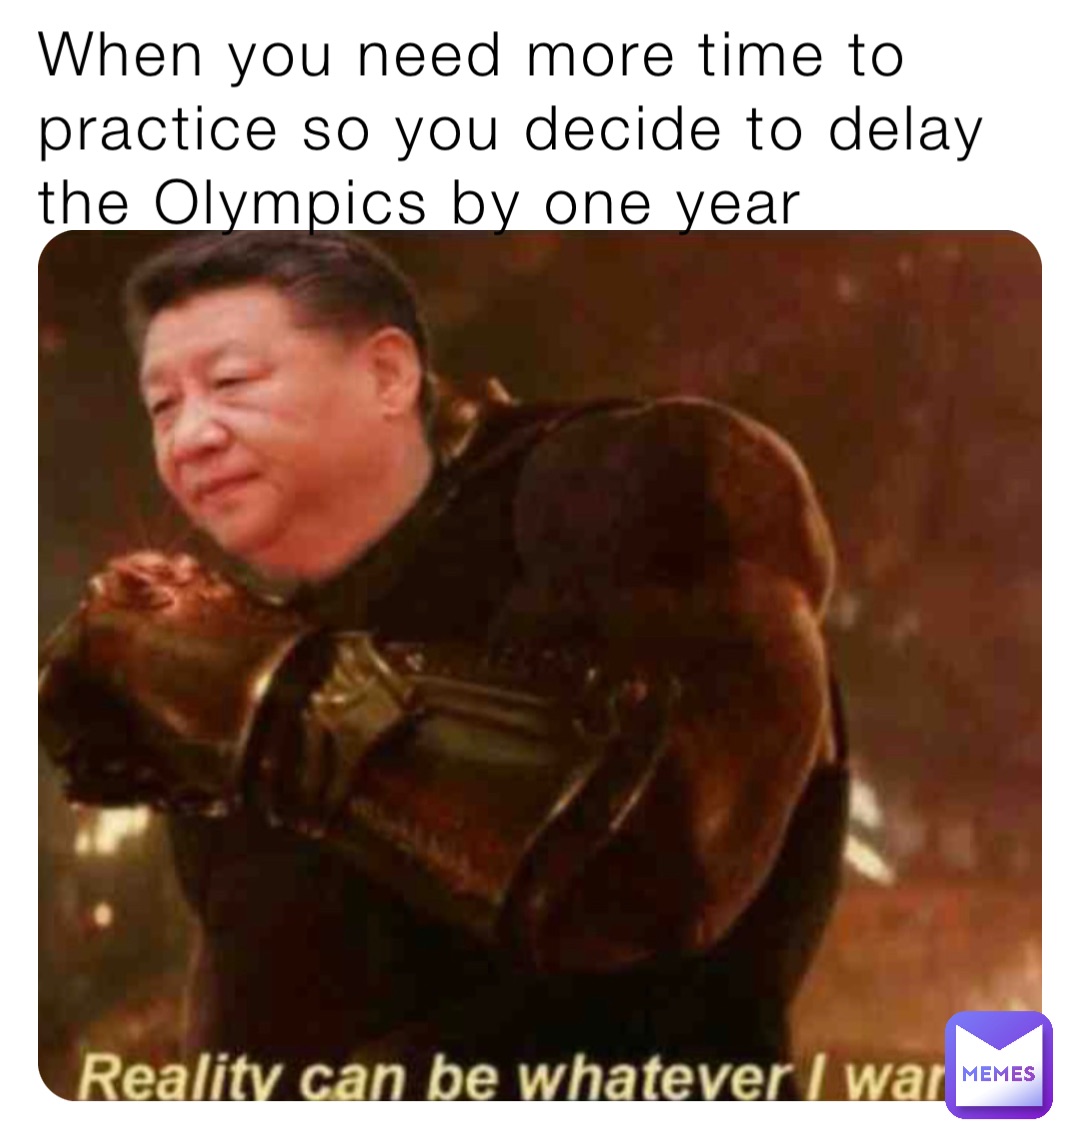 When you need more time to practice so you decide to delay the Olympics by one year